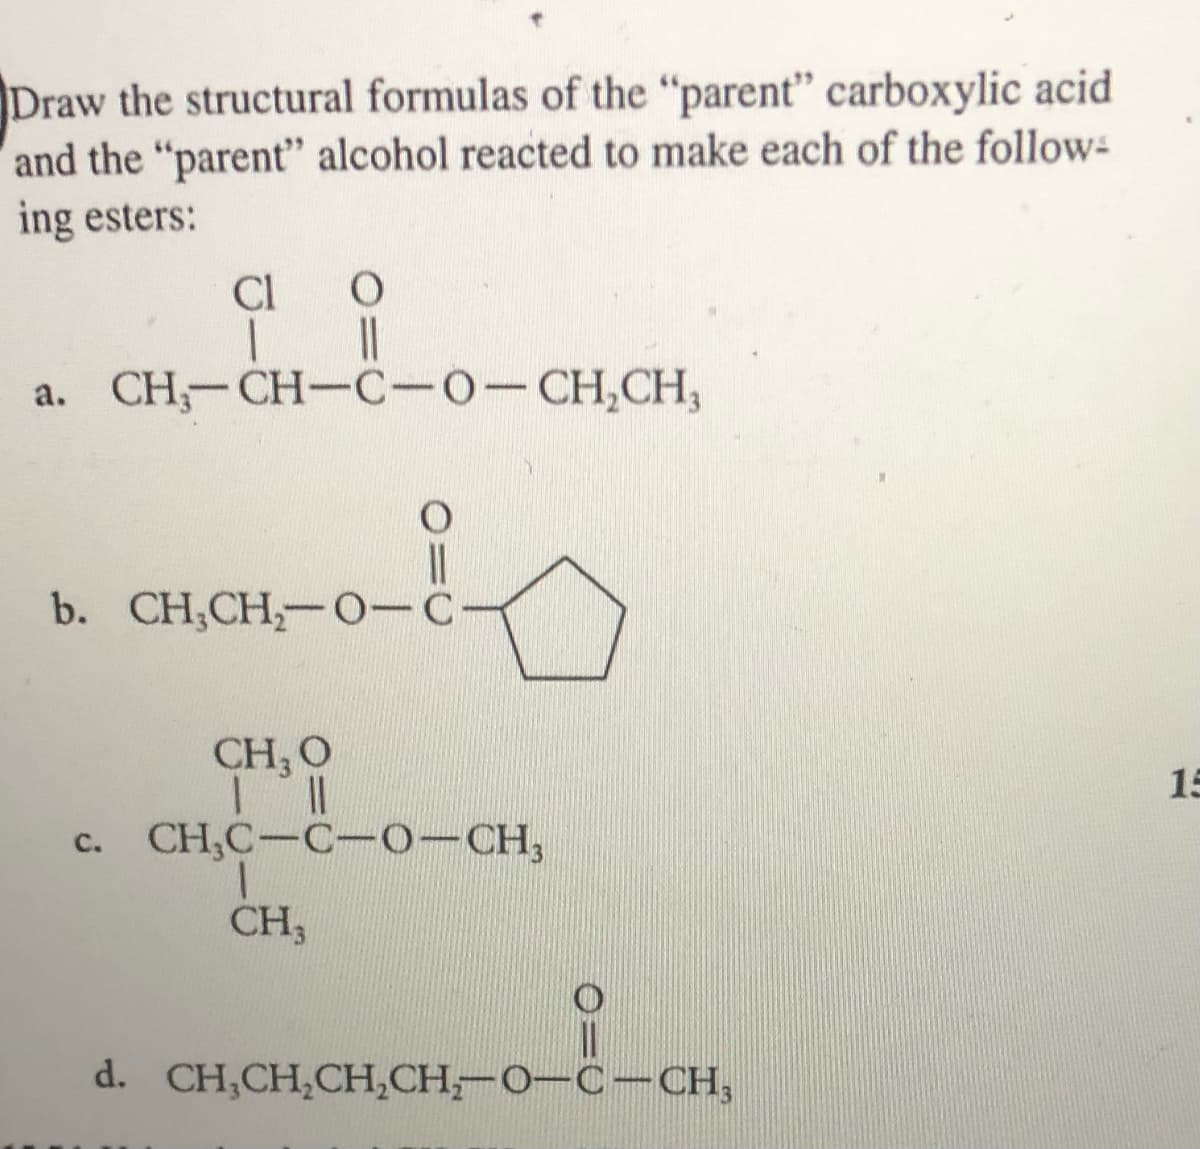 Draw the structural formulas of the "parent" carboxylic acid
and the "parent" alcohol reacted to make each of the follow-
ing esters:
Cl
a. CH-CH-C-0-CH,CH,
b. CH,CH,-O-C-
CH, O
15
CH,C-C-O-CH,
C.
CH,
d. CH,CH,CH,СН - О—С—CH,
